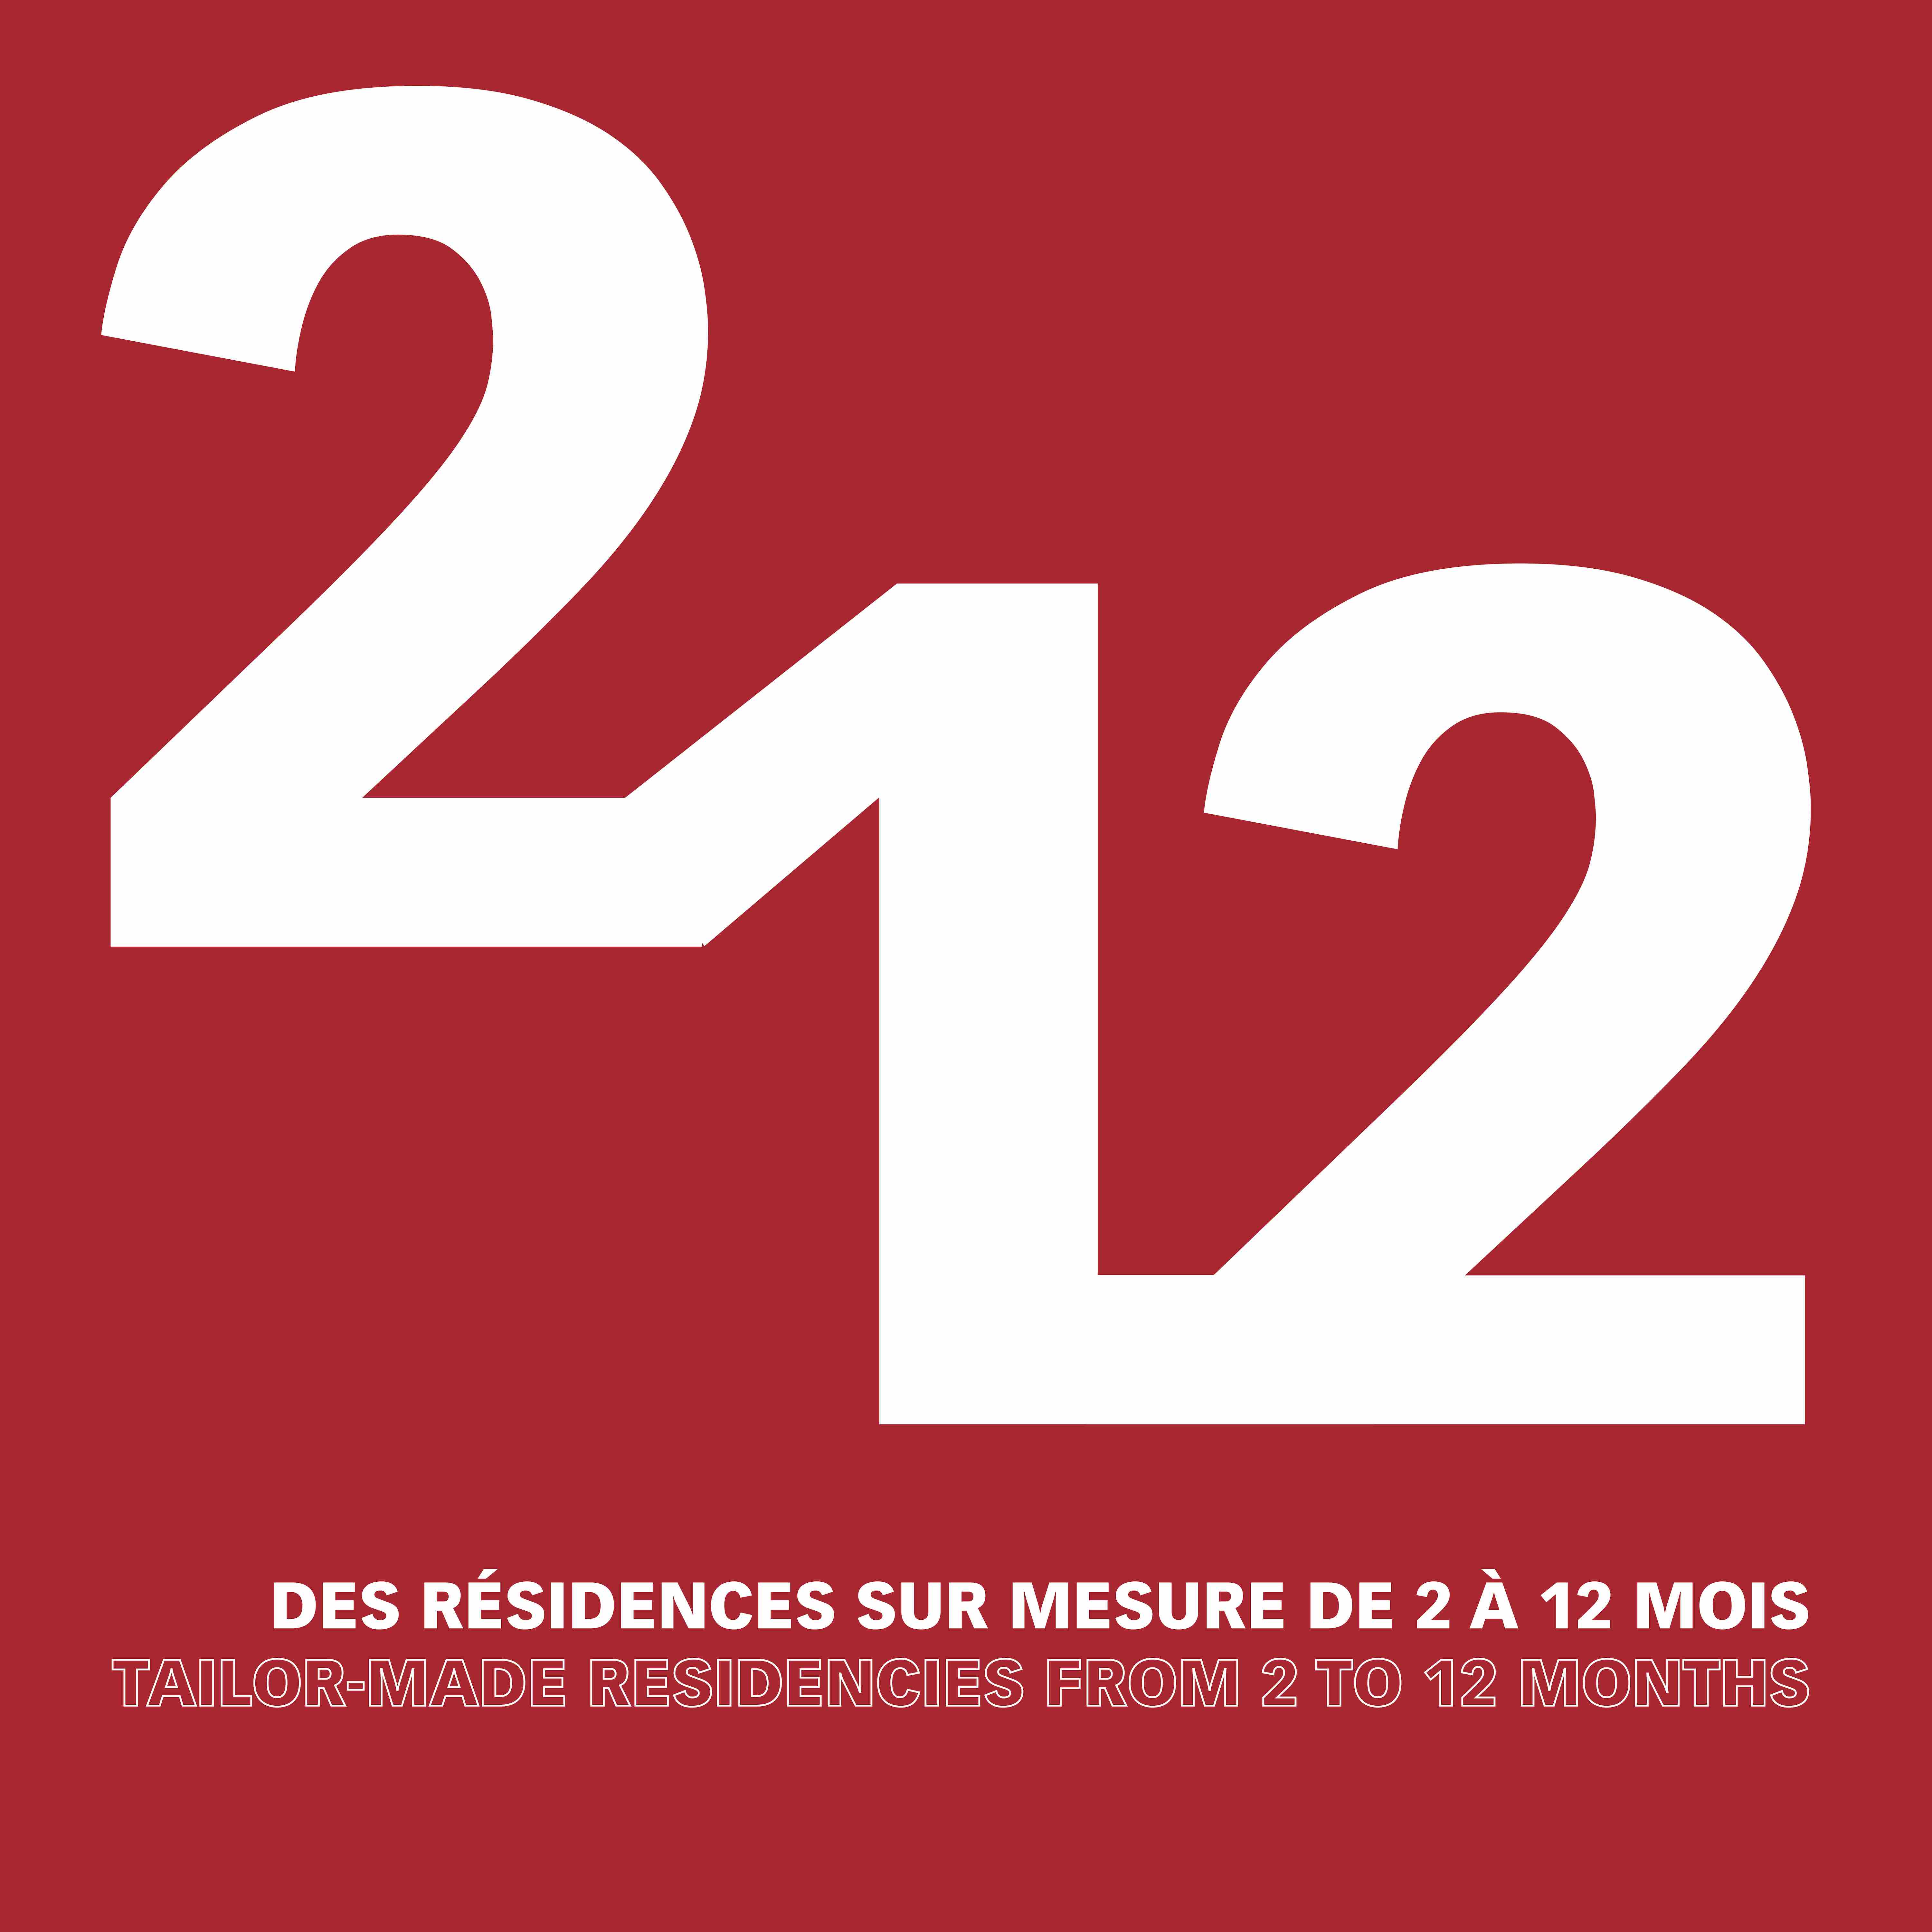 Cité internationale des arts - Tailor-made residencies from 2 to 12 months